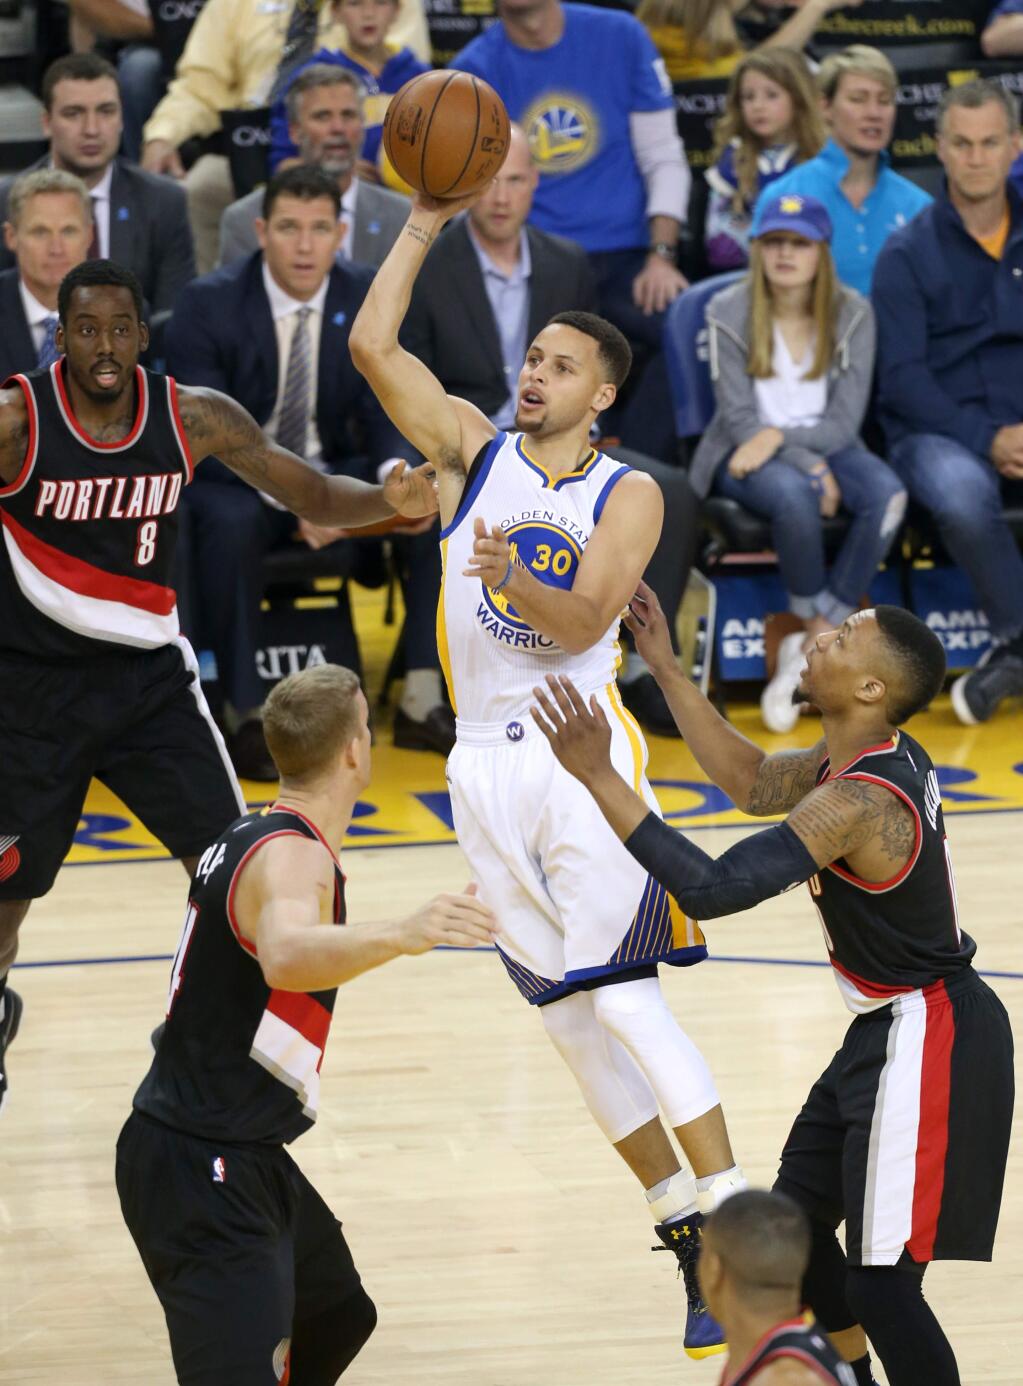 Golden State Warriors guard Stephen Curry floats a shot over the Portland Trailblazers defense during their game in Oakland on Sunday, April 3, 2016. (Christopher Chung/ The Press Democrat)